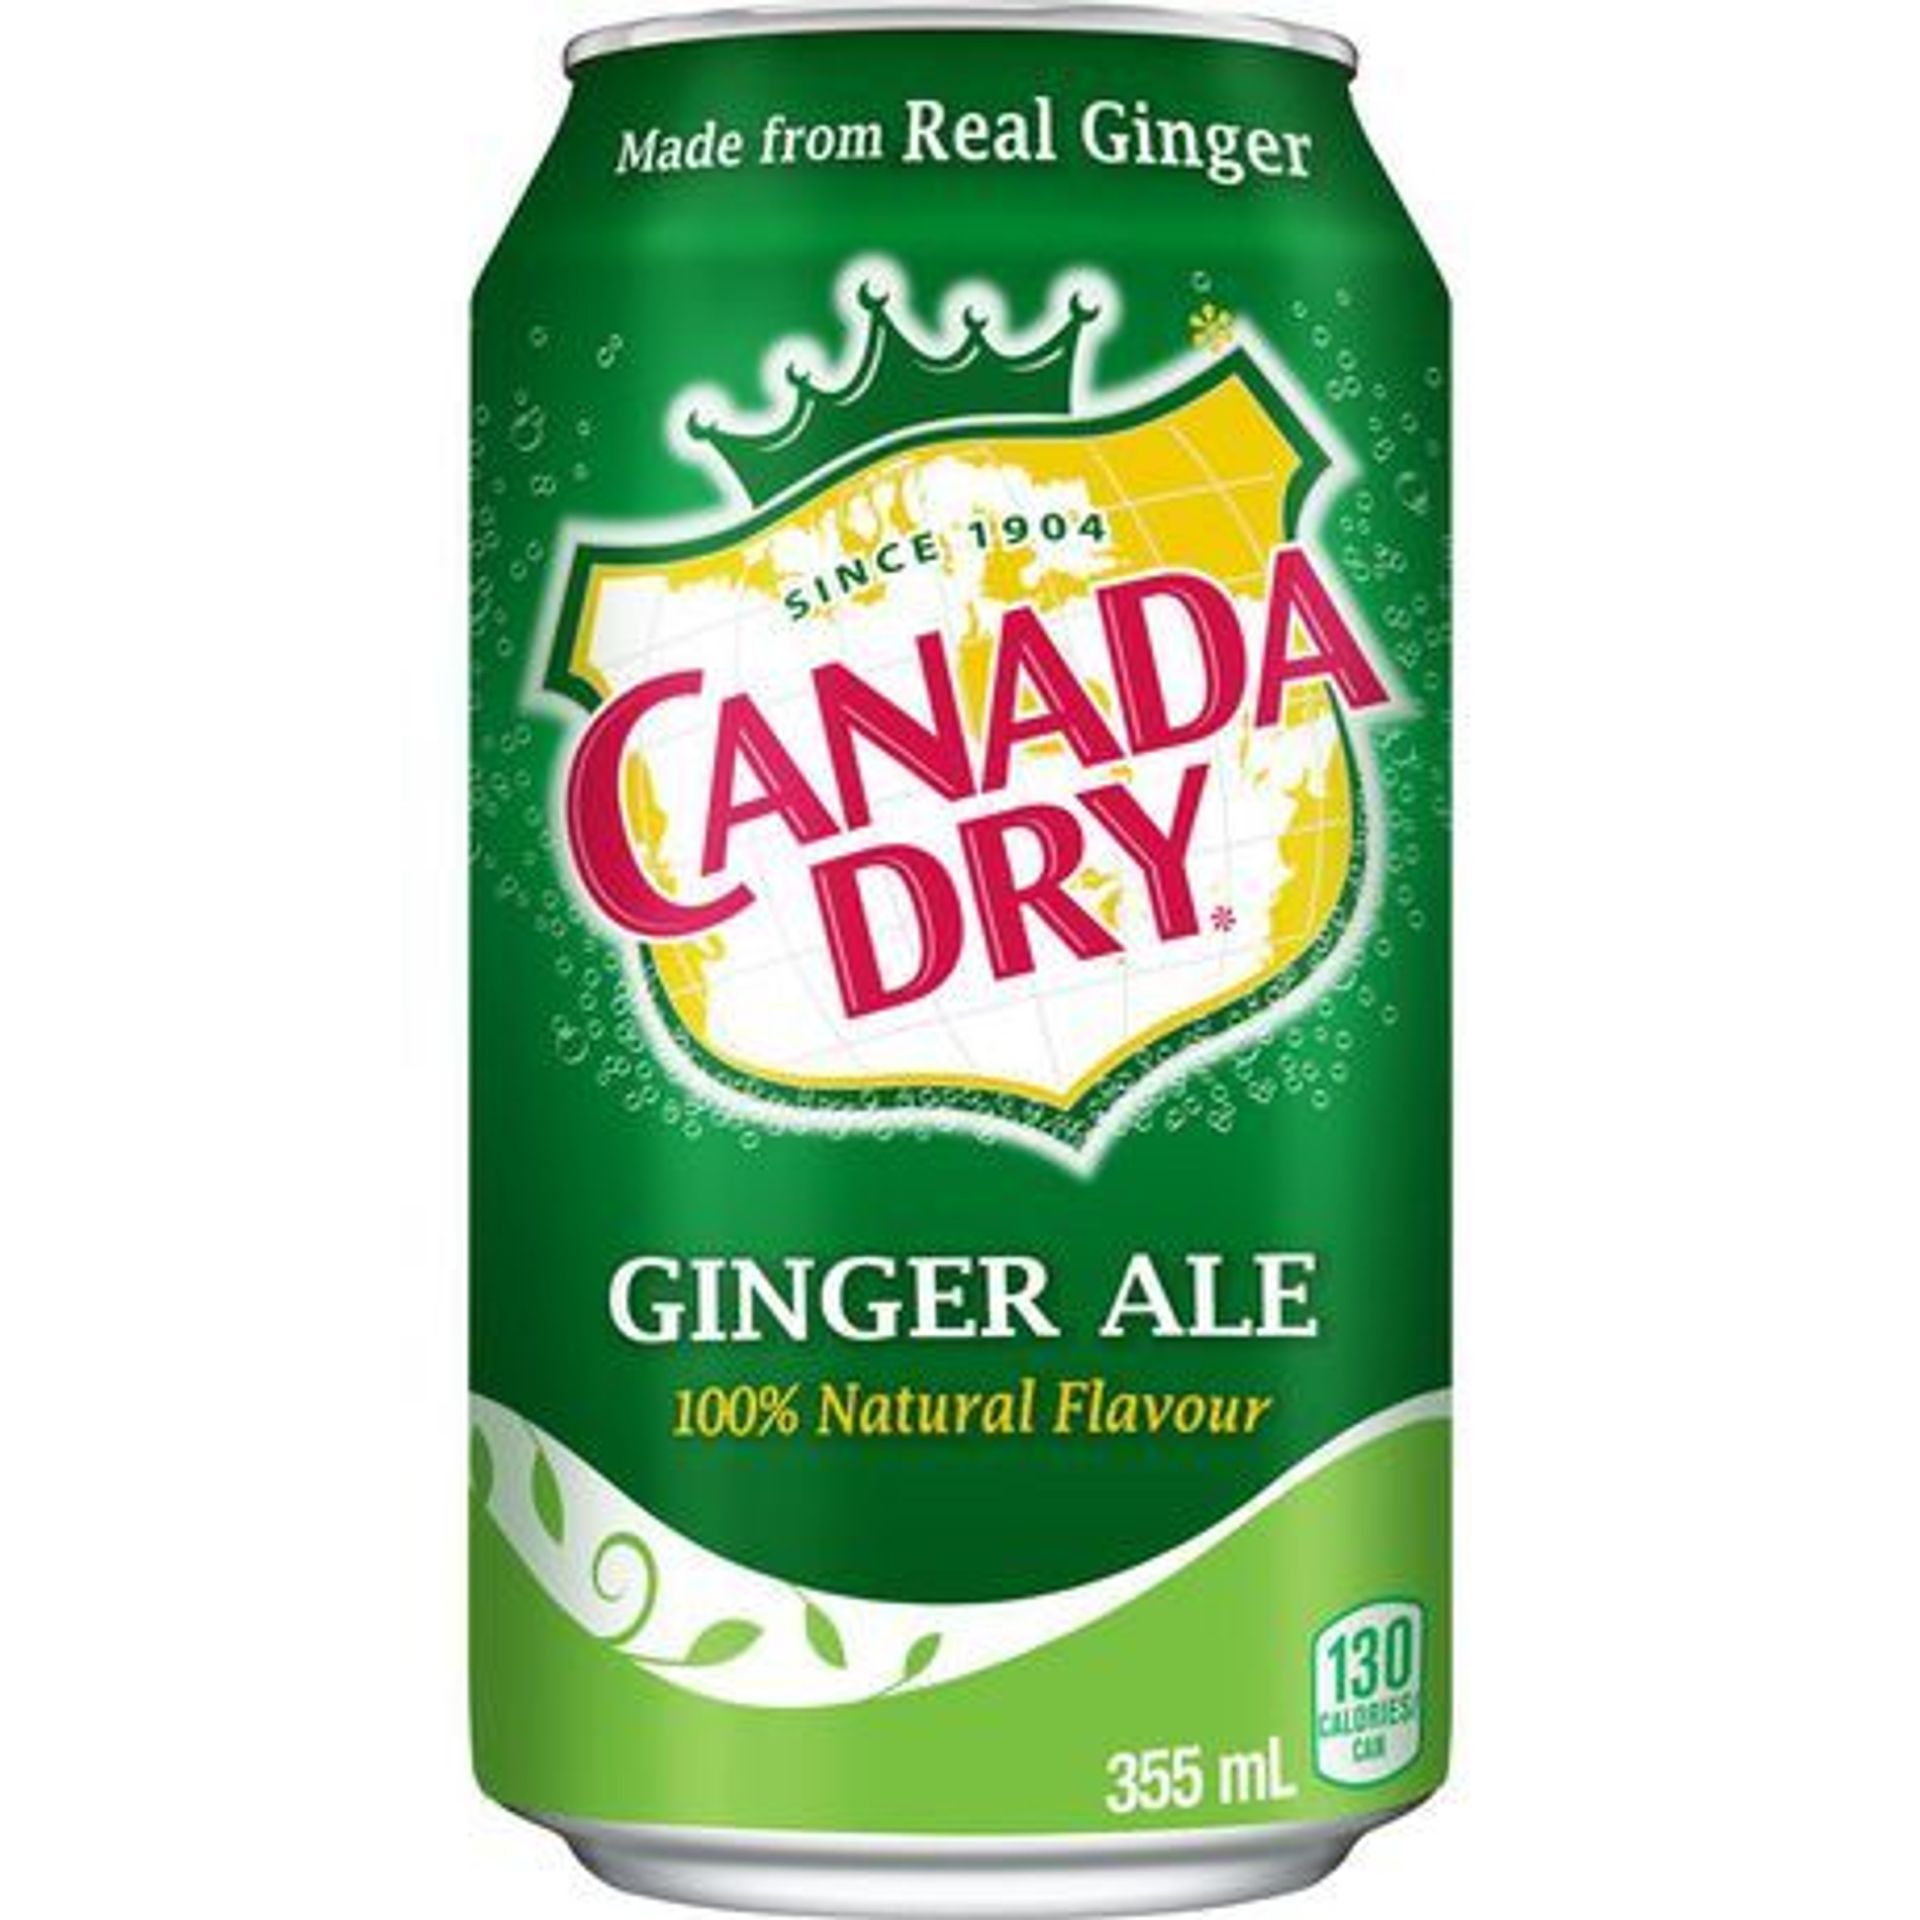 Pop Canada Dry Ginger Ale